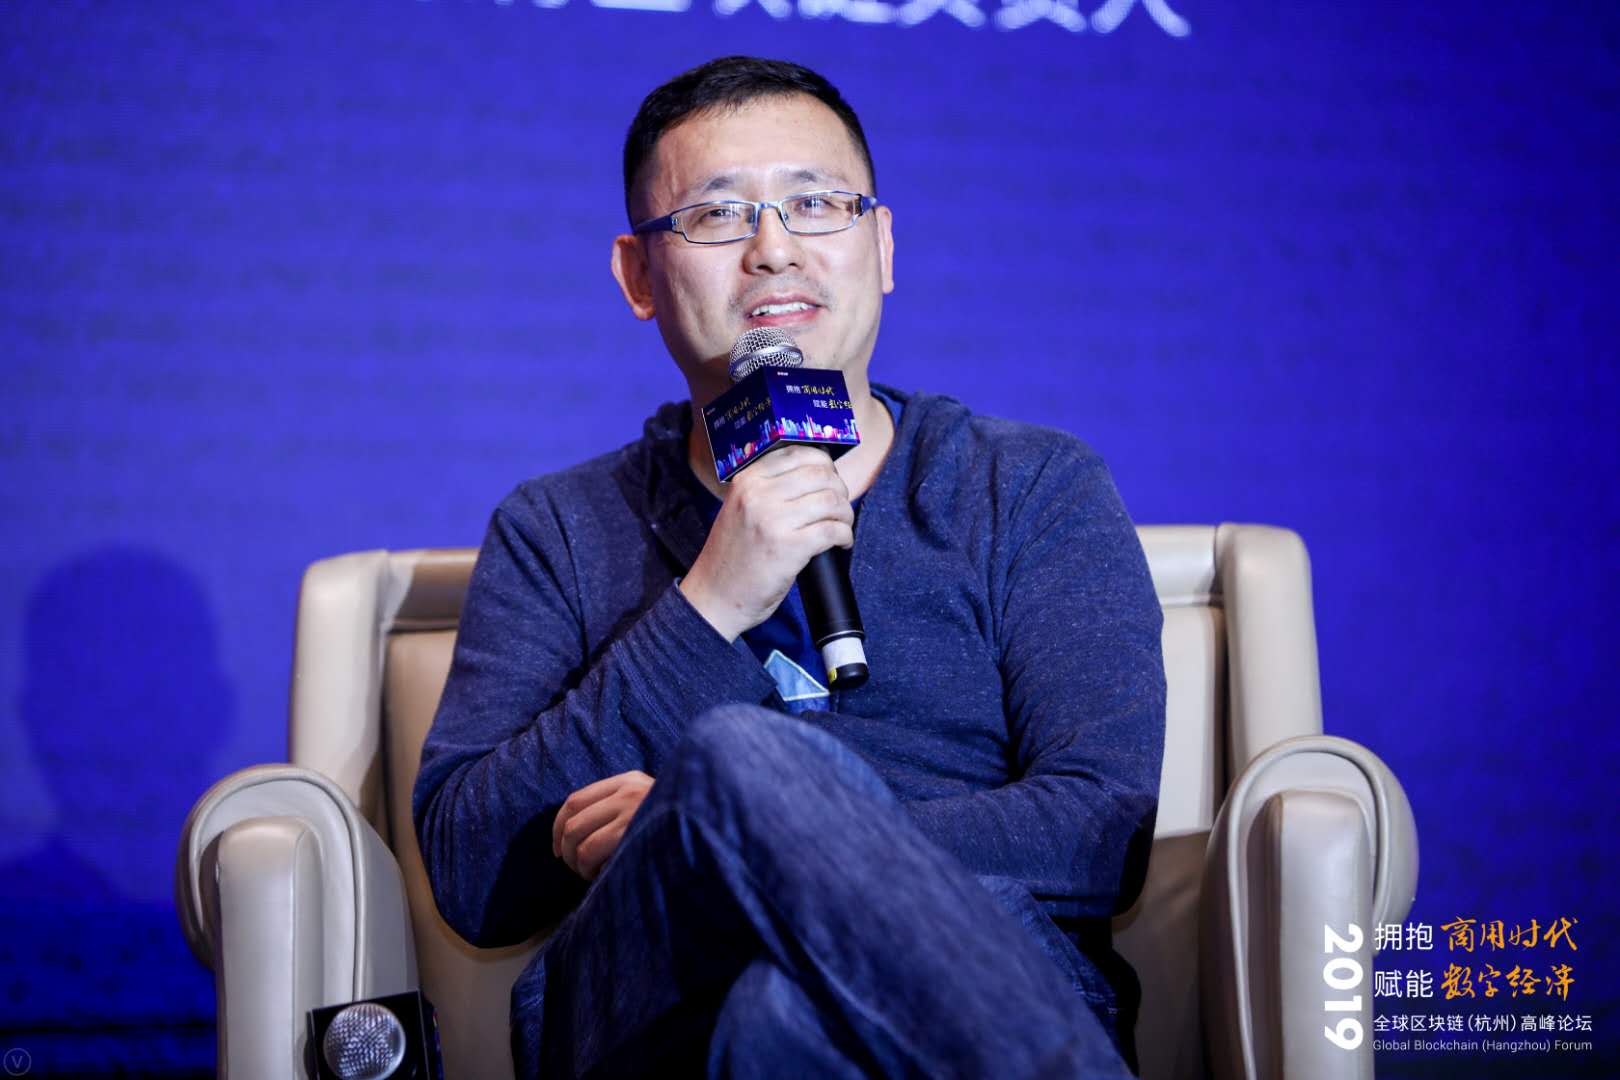 Dialogue with Weizhong Bank Fan Ruibin: "Connector" and "Open Source Ecology", two major tools for micro-blockchain layout